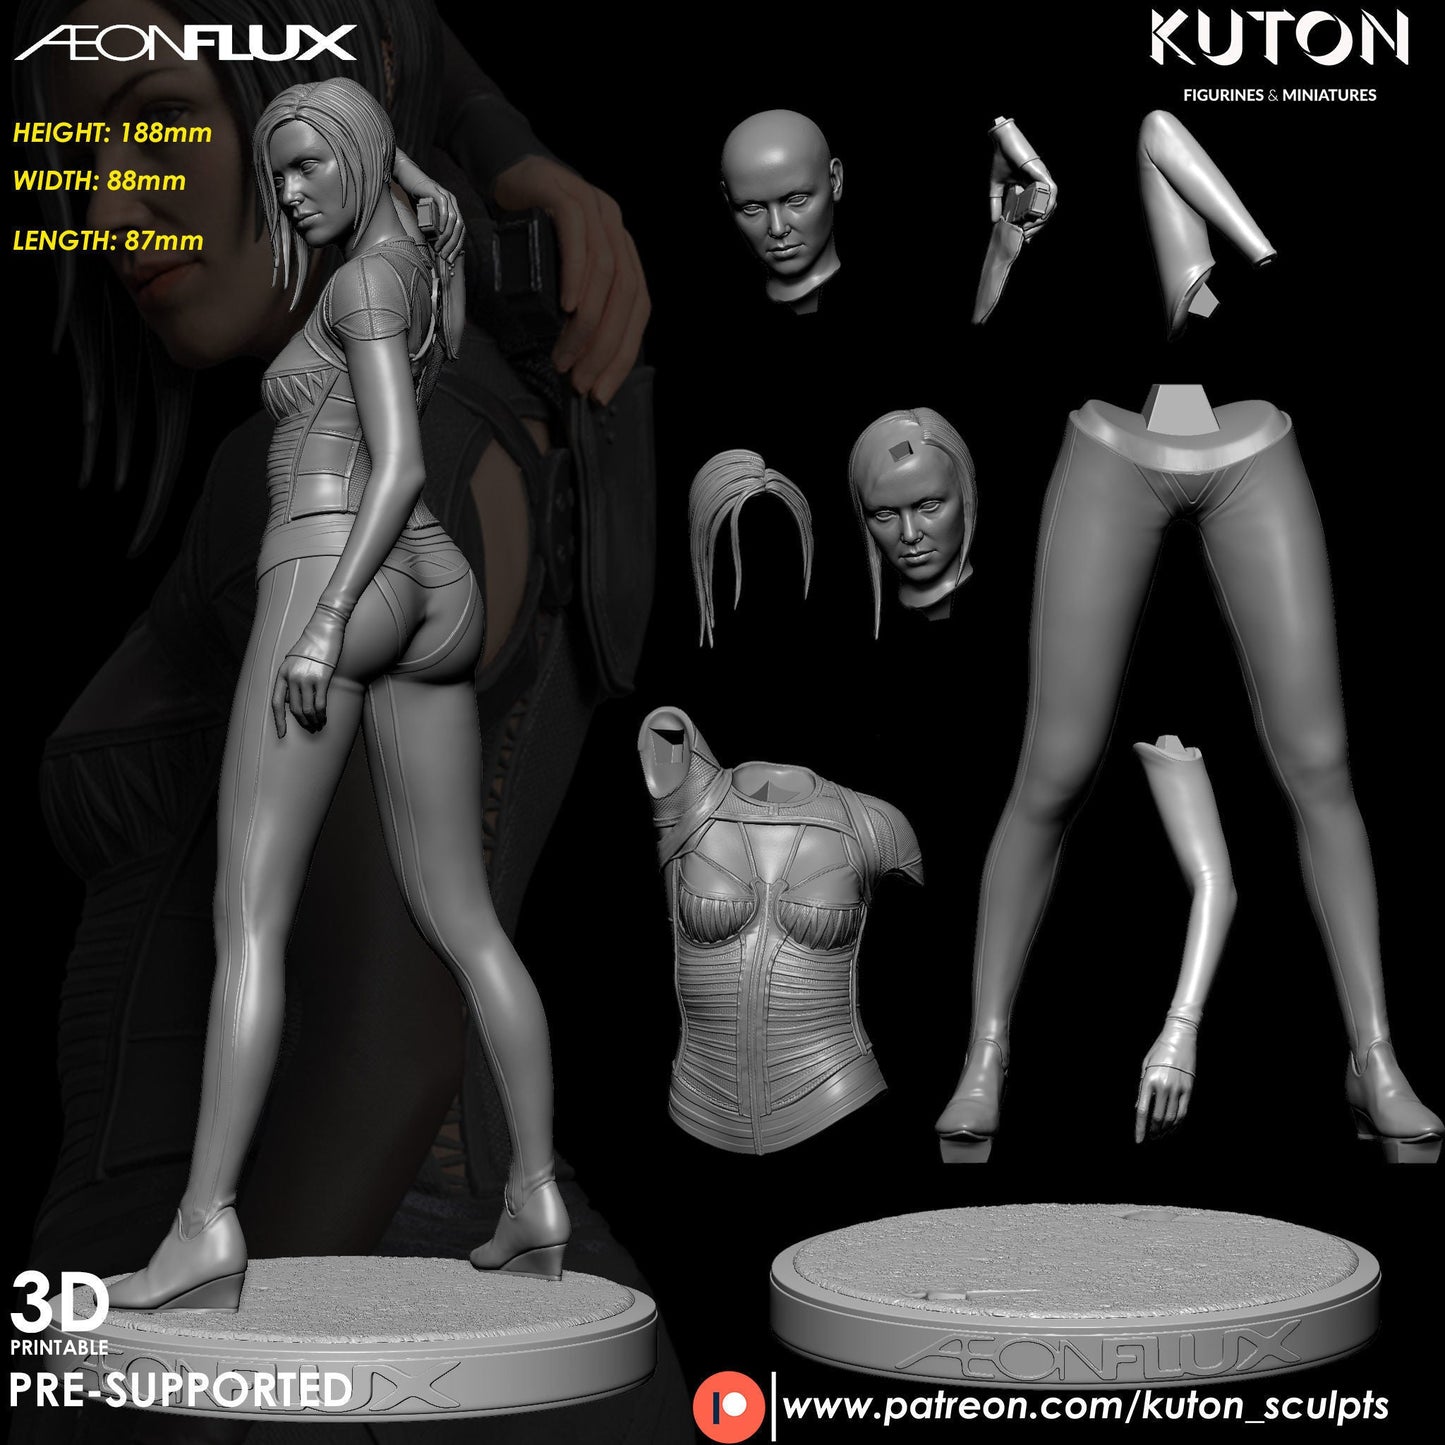 AEon Flux DIORAMA 3d printed Resin Figure Model Kit miniatures figurines collectibles and scale models UNPAINTED Fun Art by KUTON FIGURINES